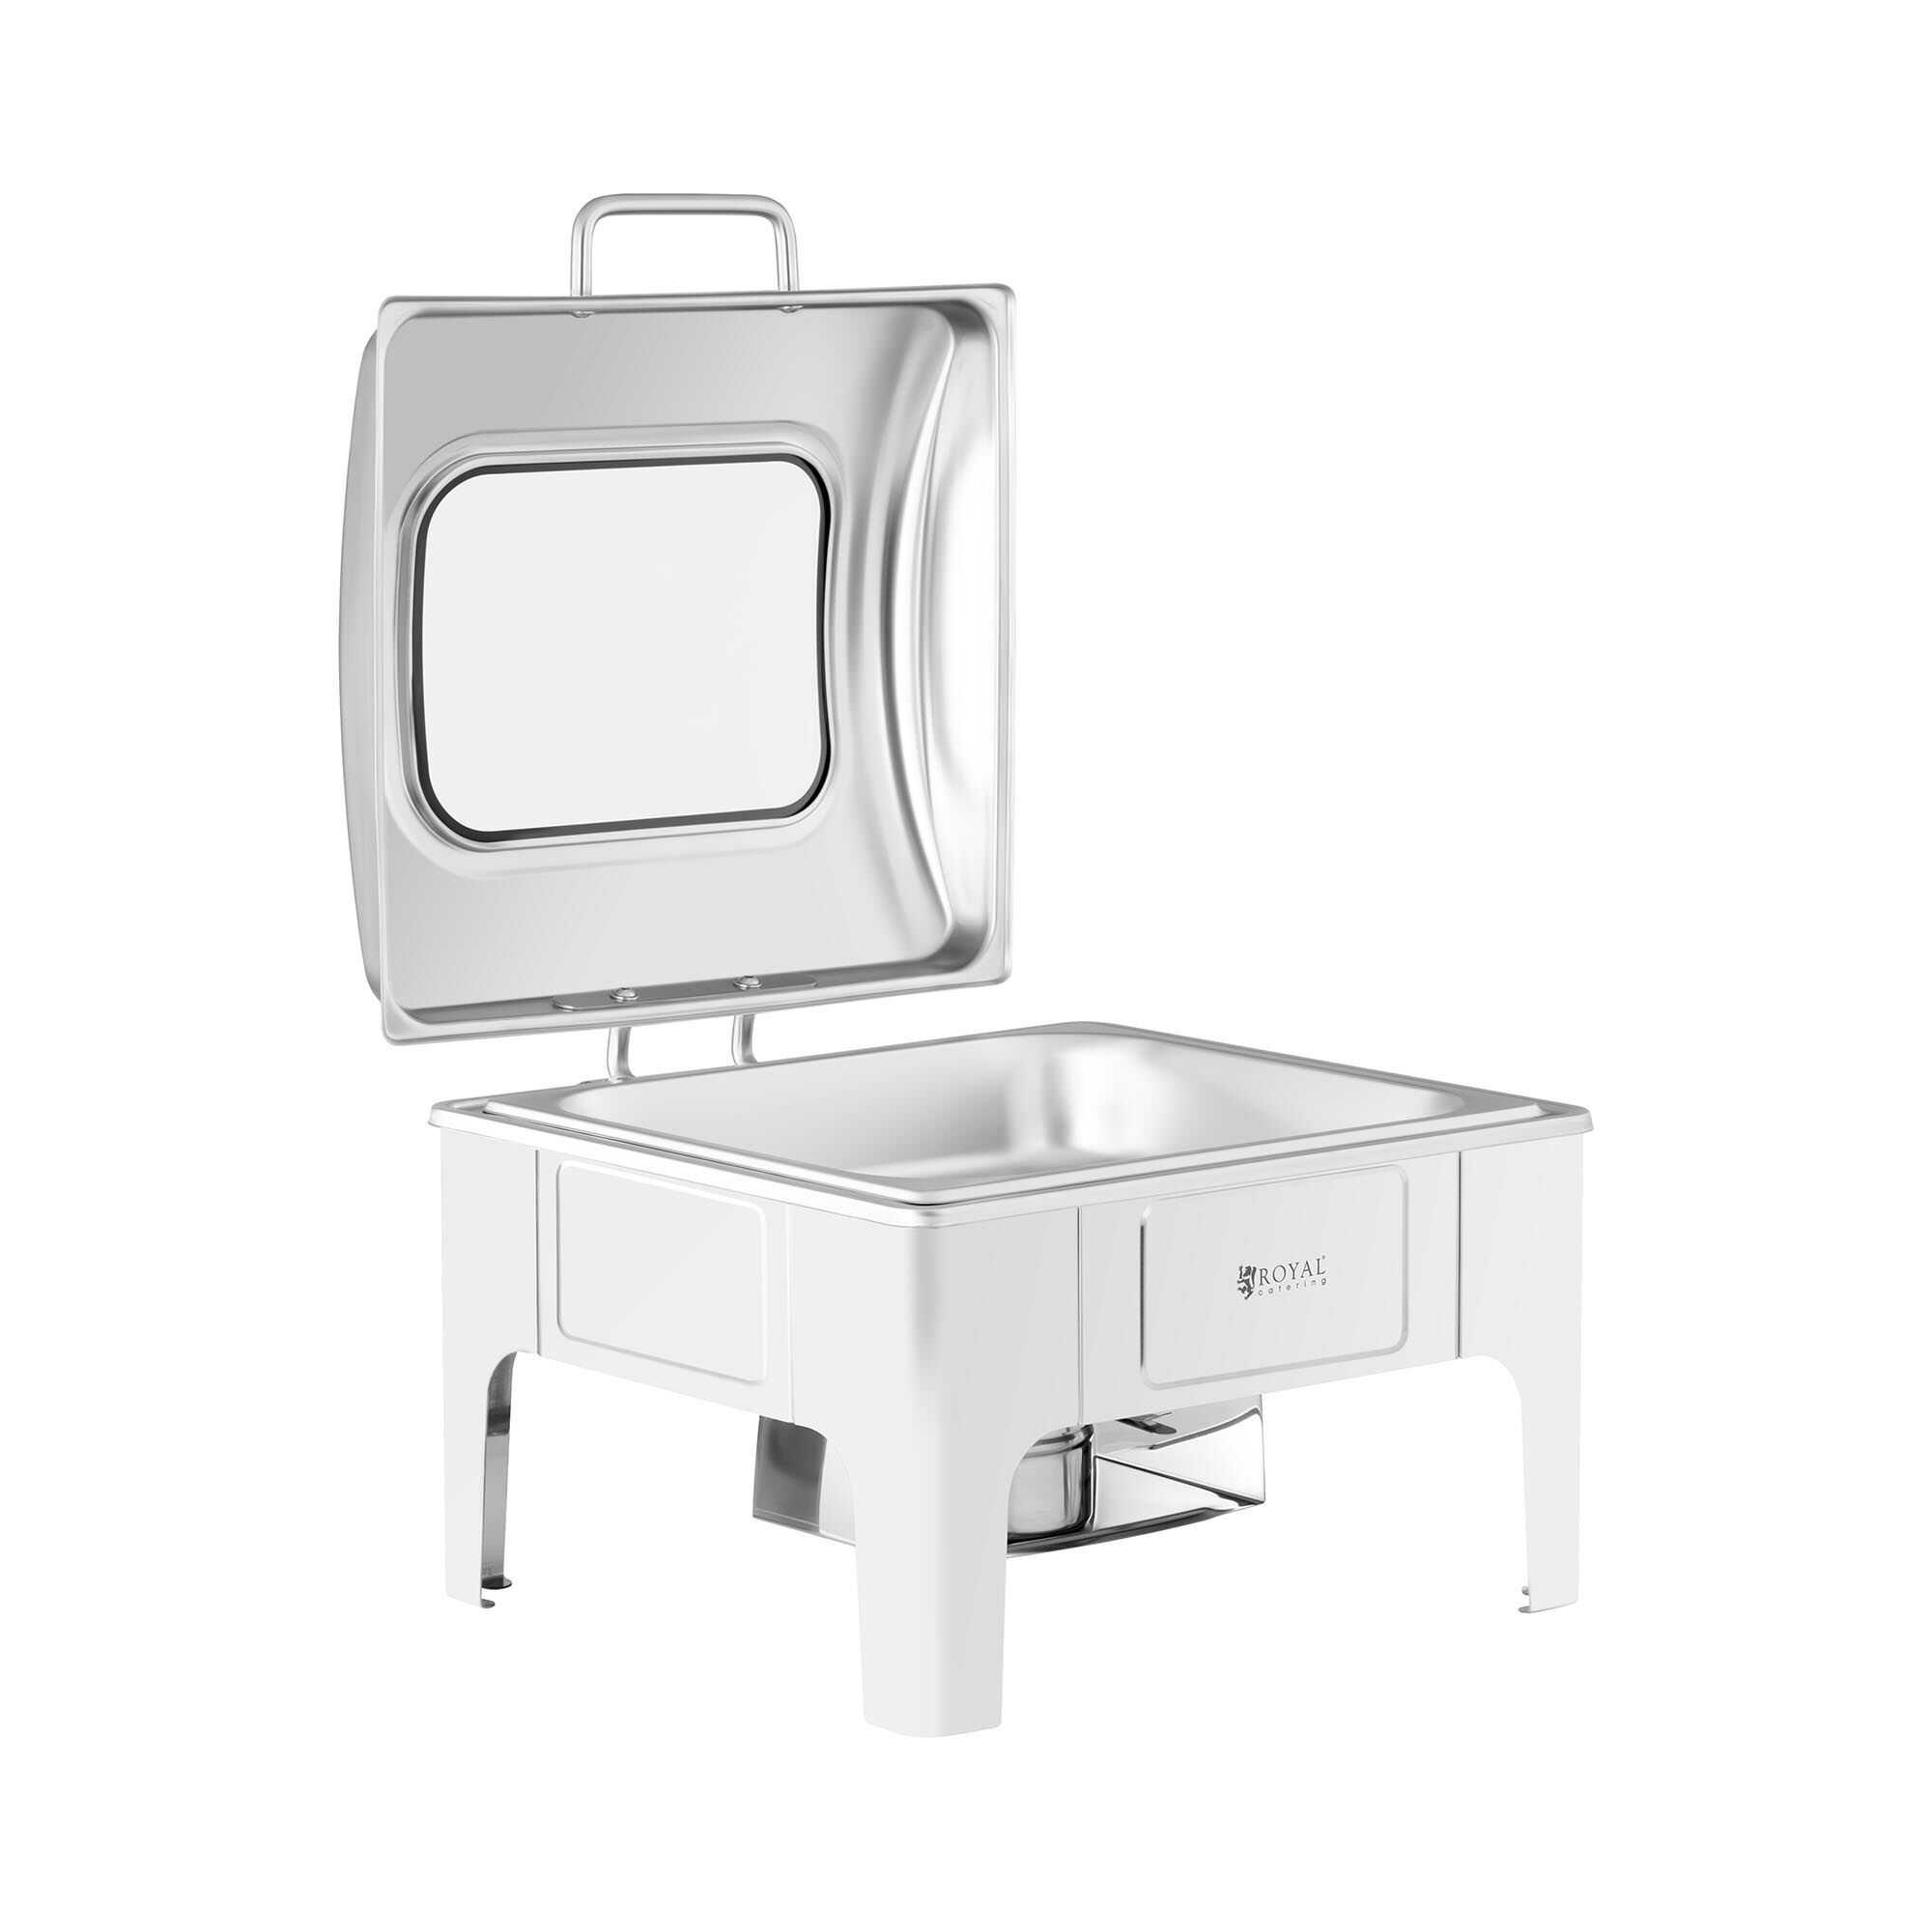 Royal Catering Chafing Dish - GN 2/3 - Royal Catering - 5.3 L - 1 fuel cells - viewing window